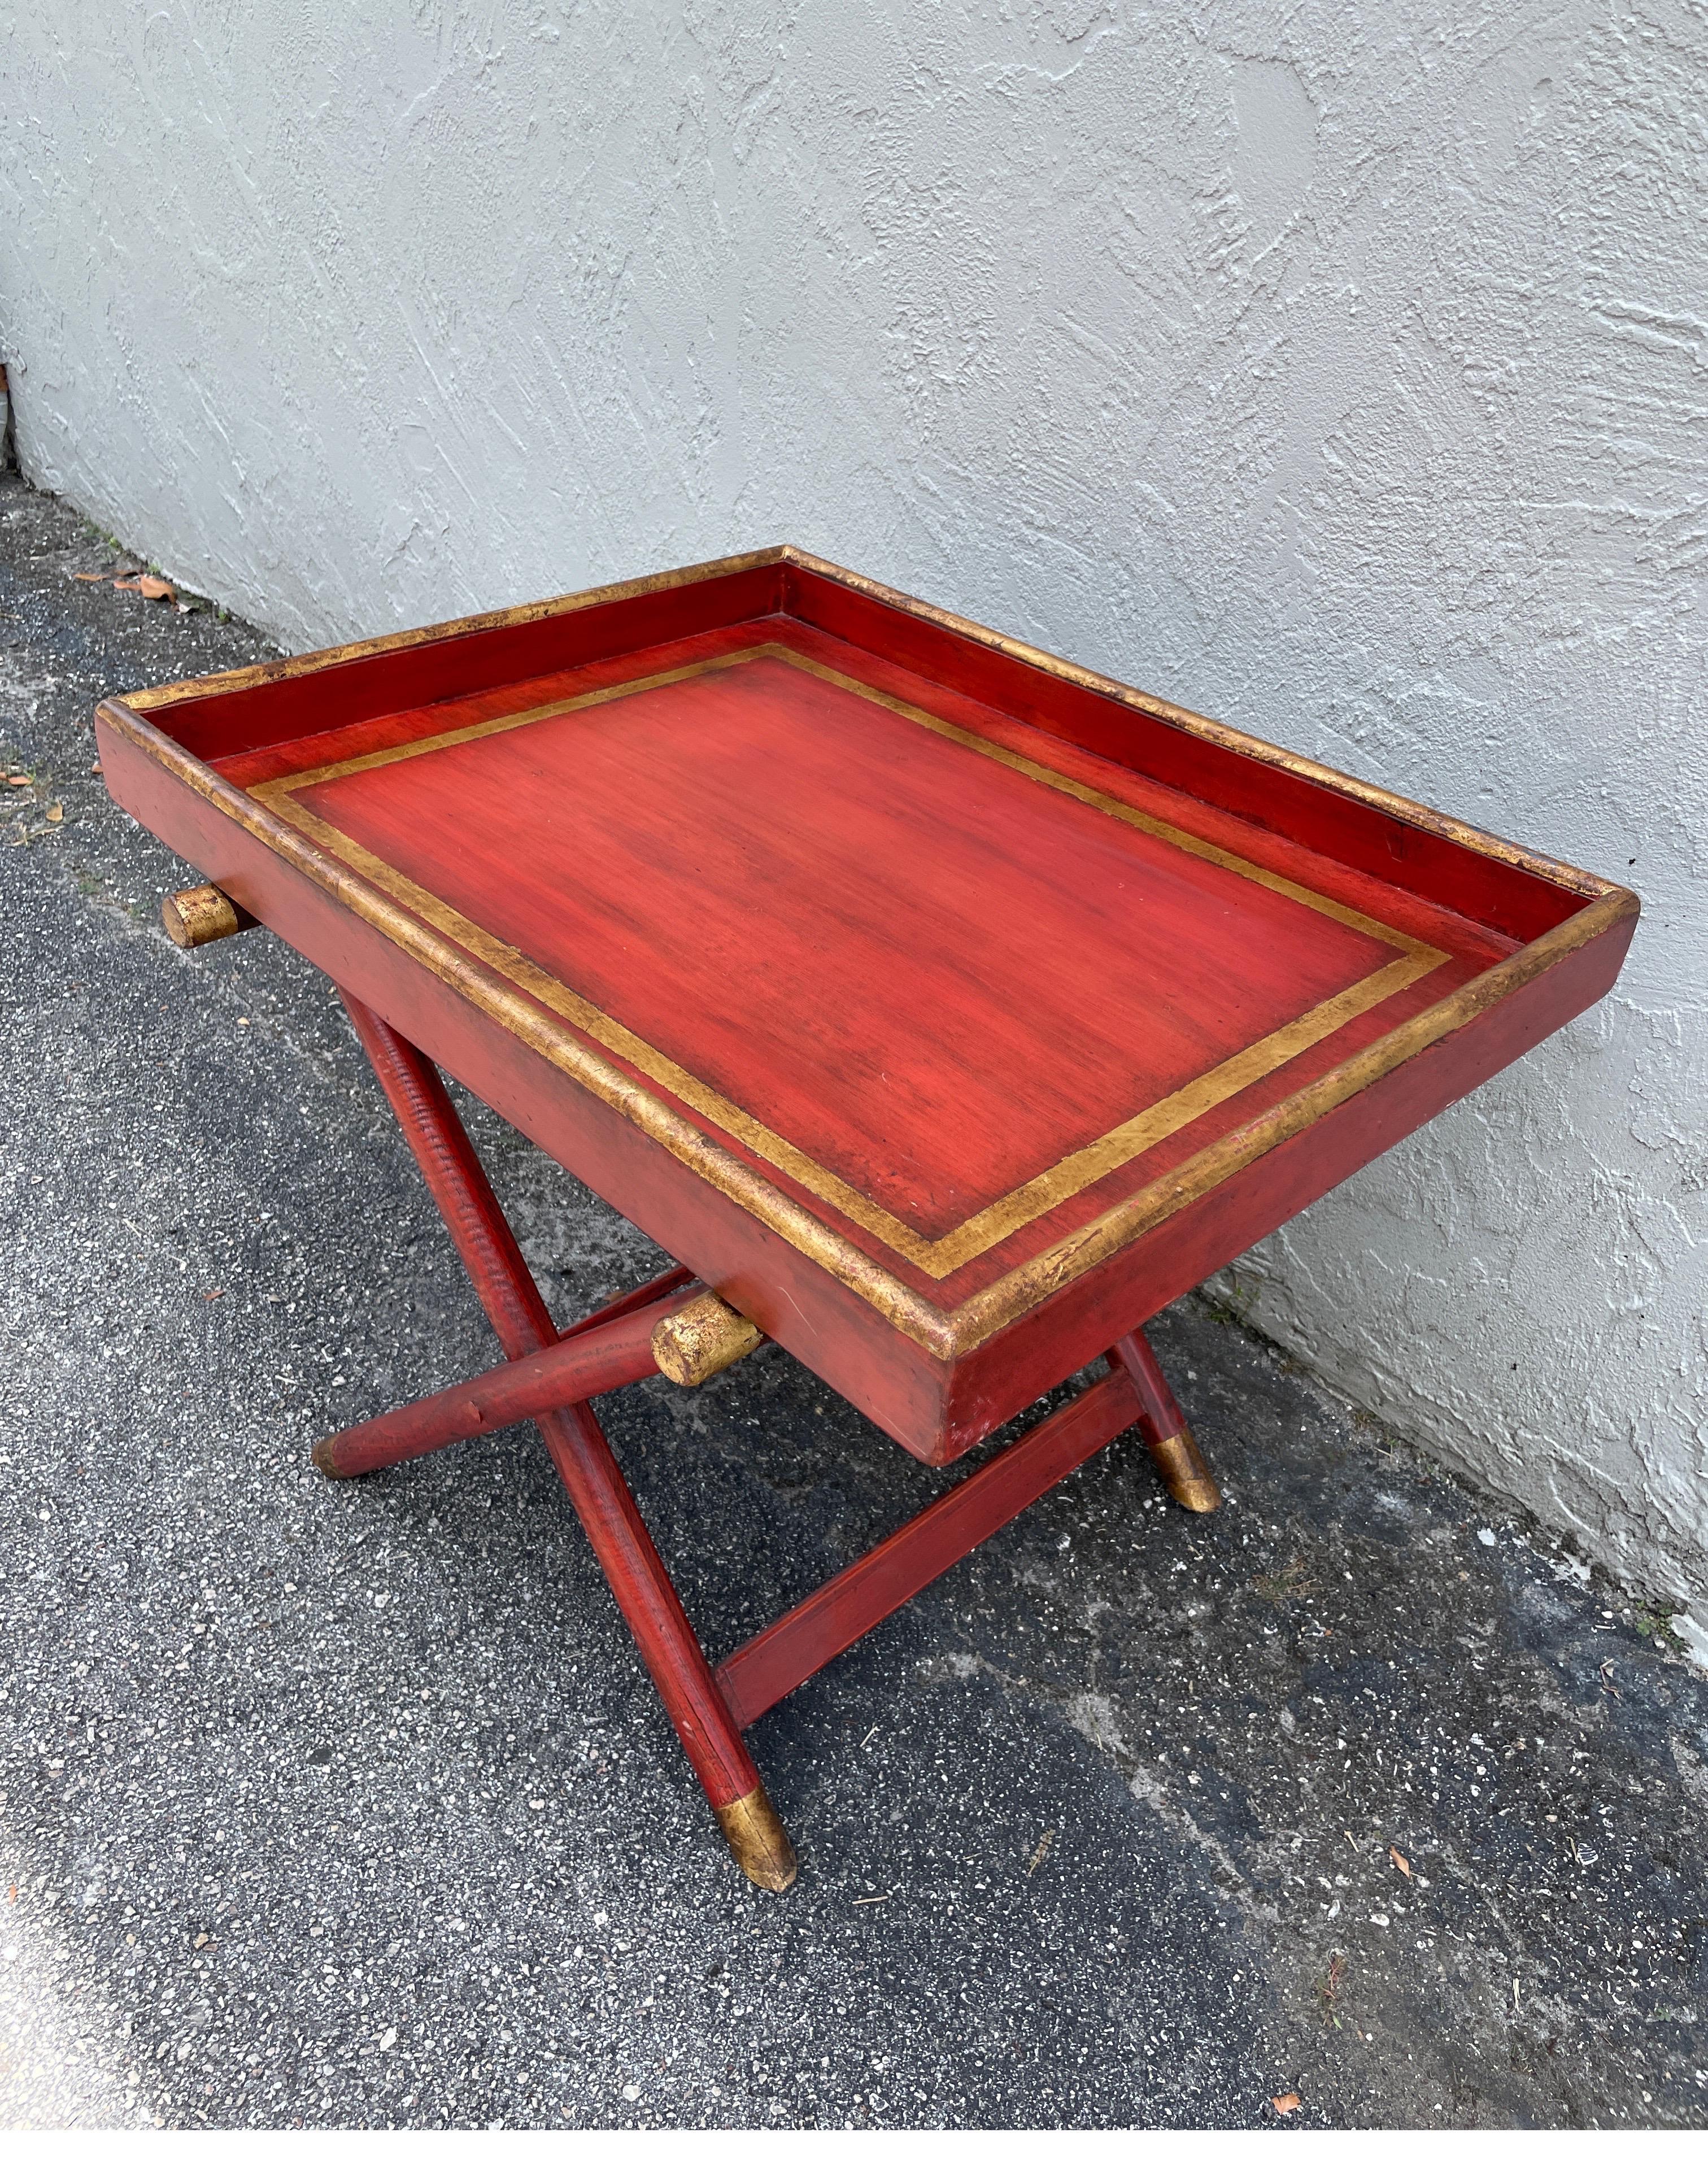 Hand painted tray top table in red with gold accents. Table does not collapse or detach. With X style base.